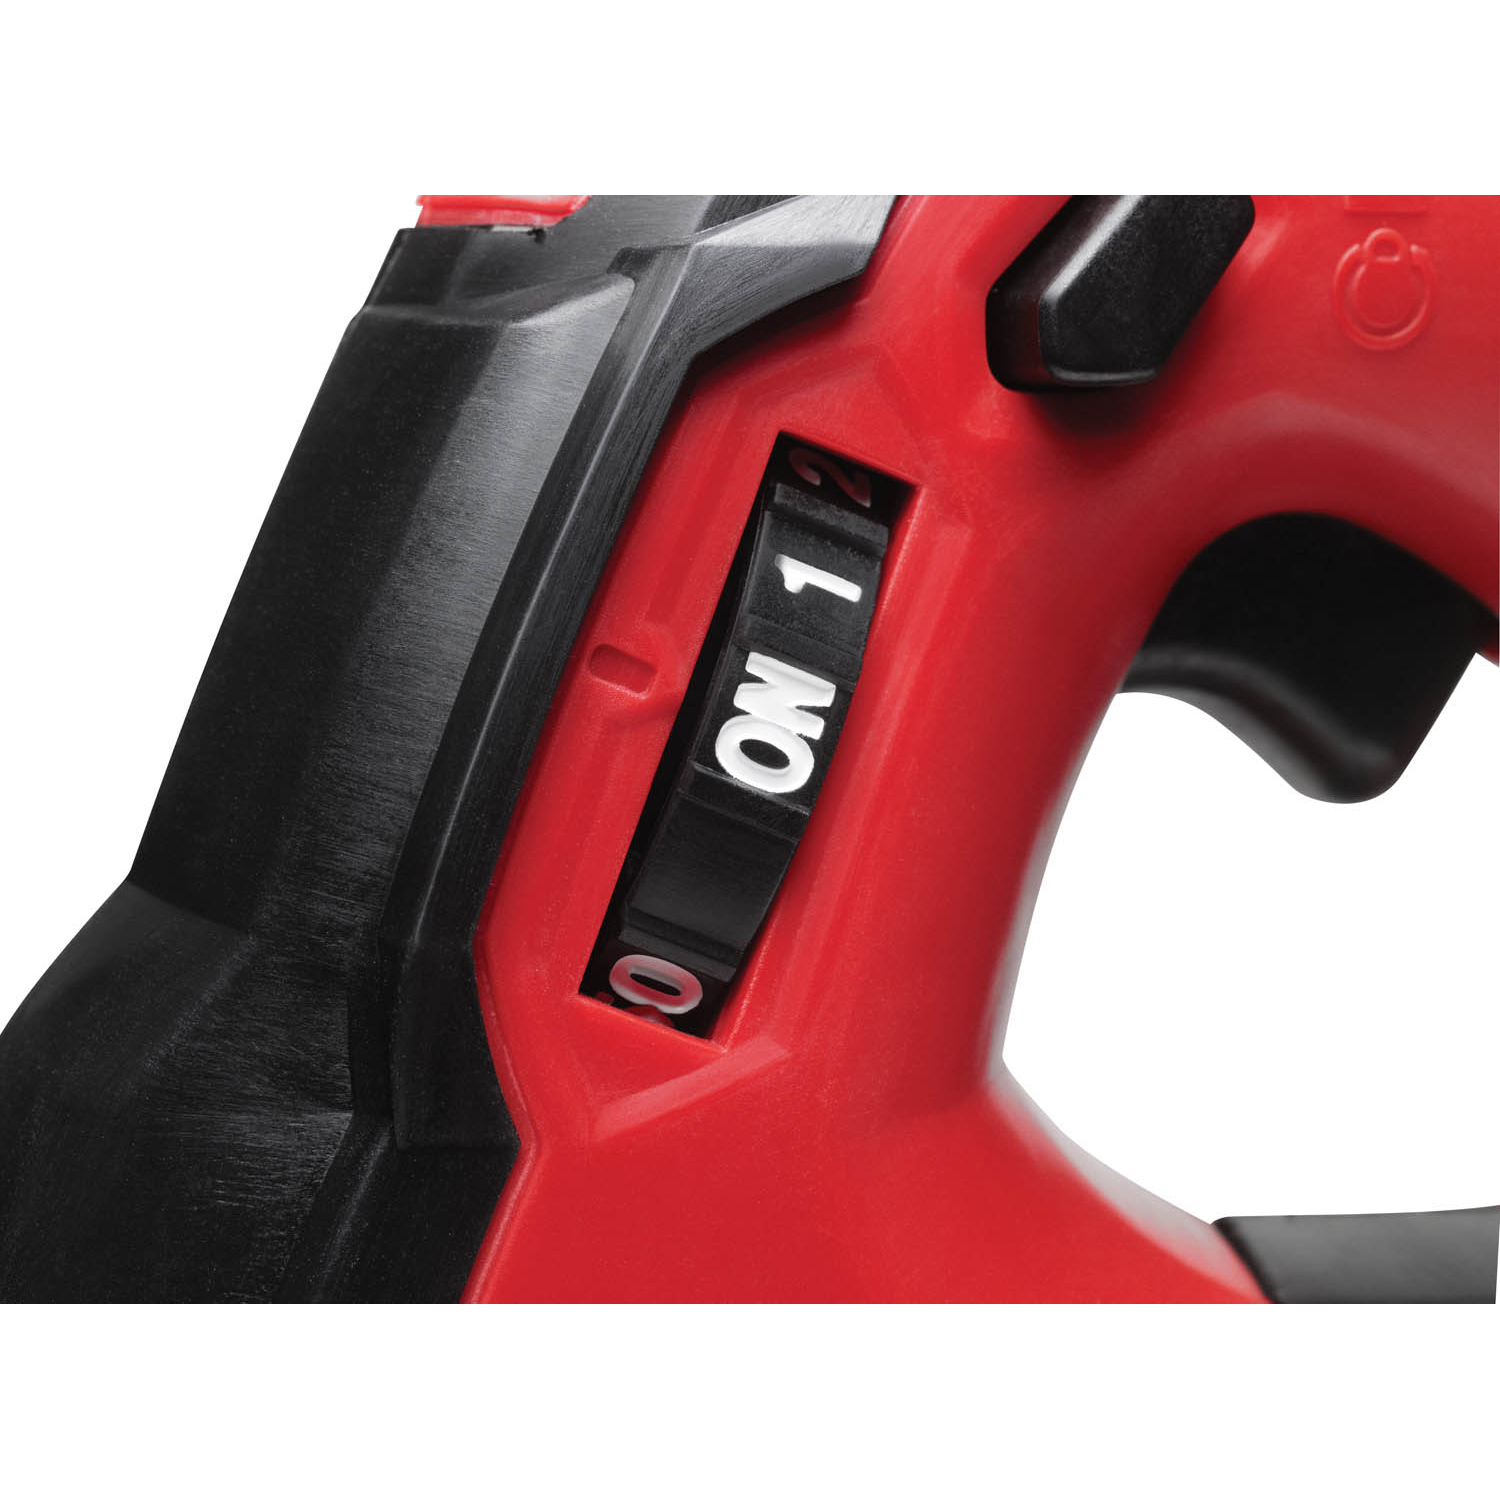 M18 CORDLESS 2-SPEED GREASE GUN (TOOL ONLY)